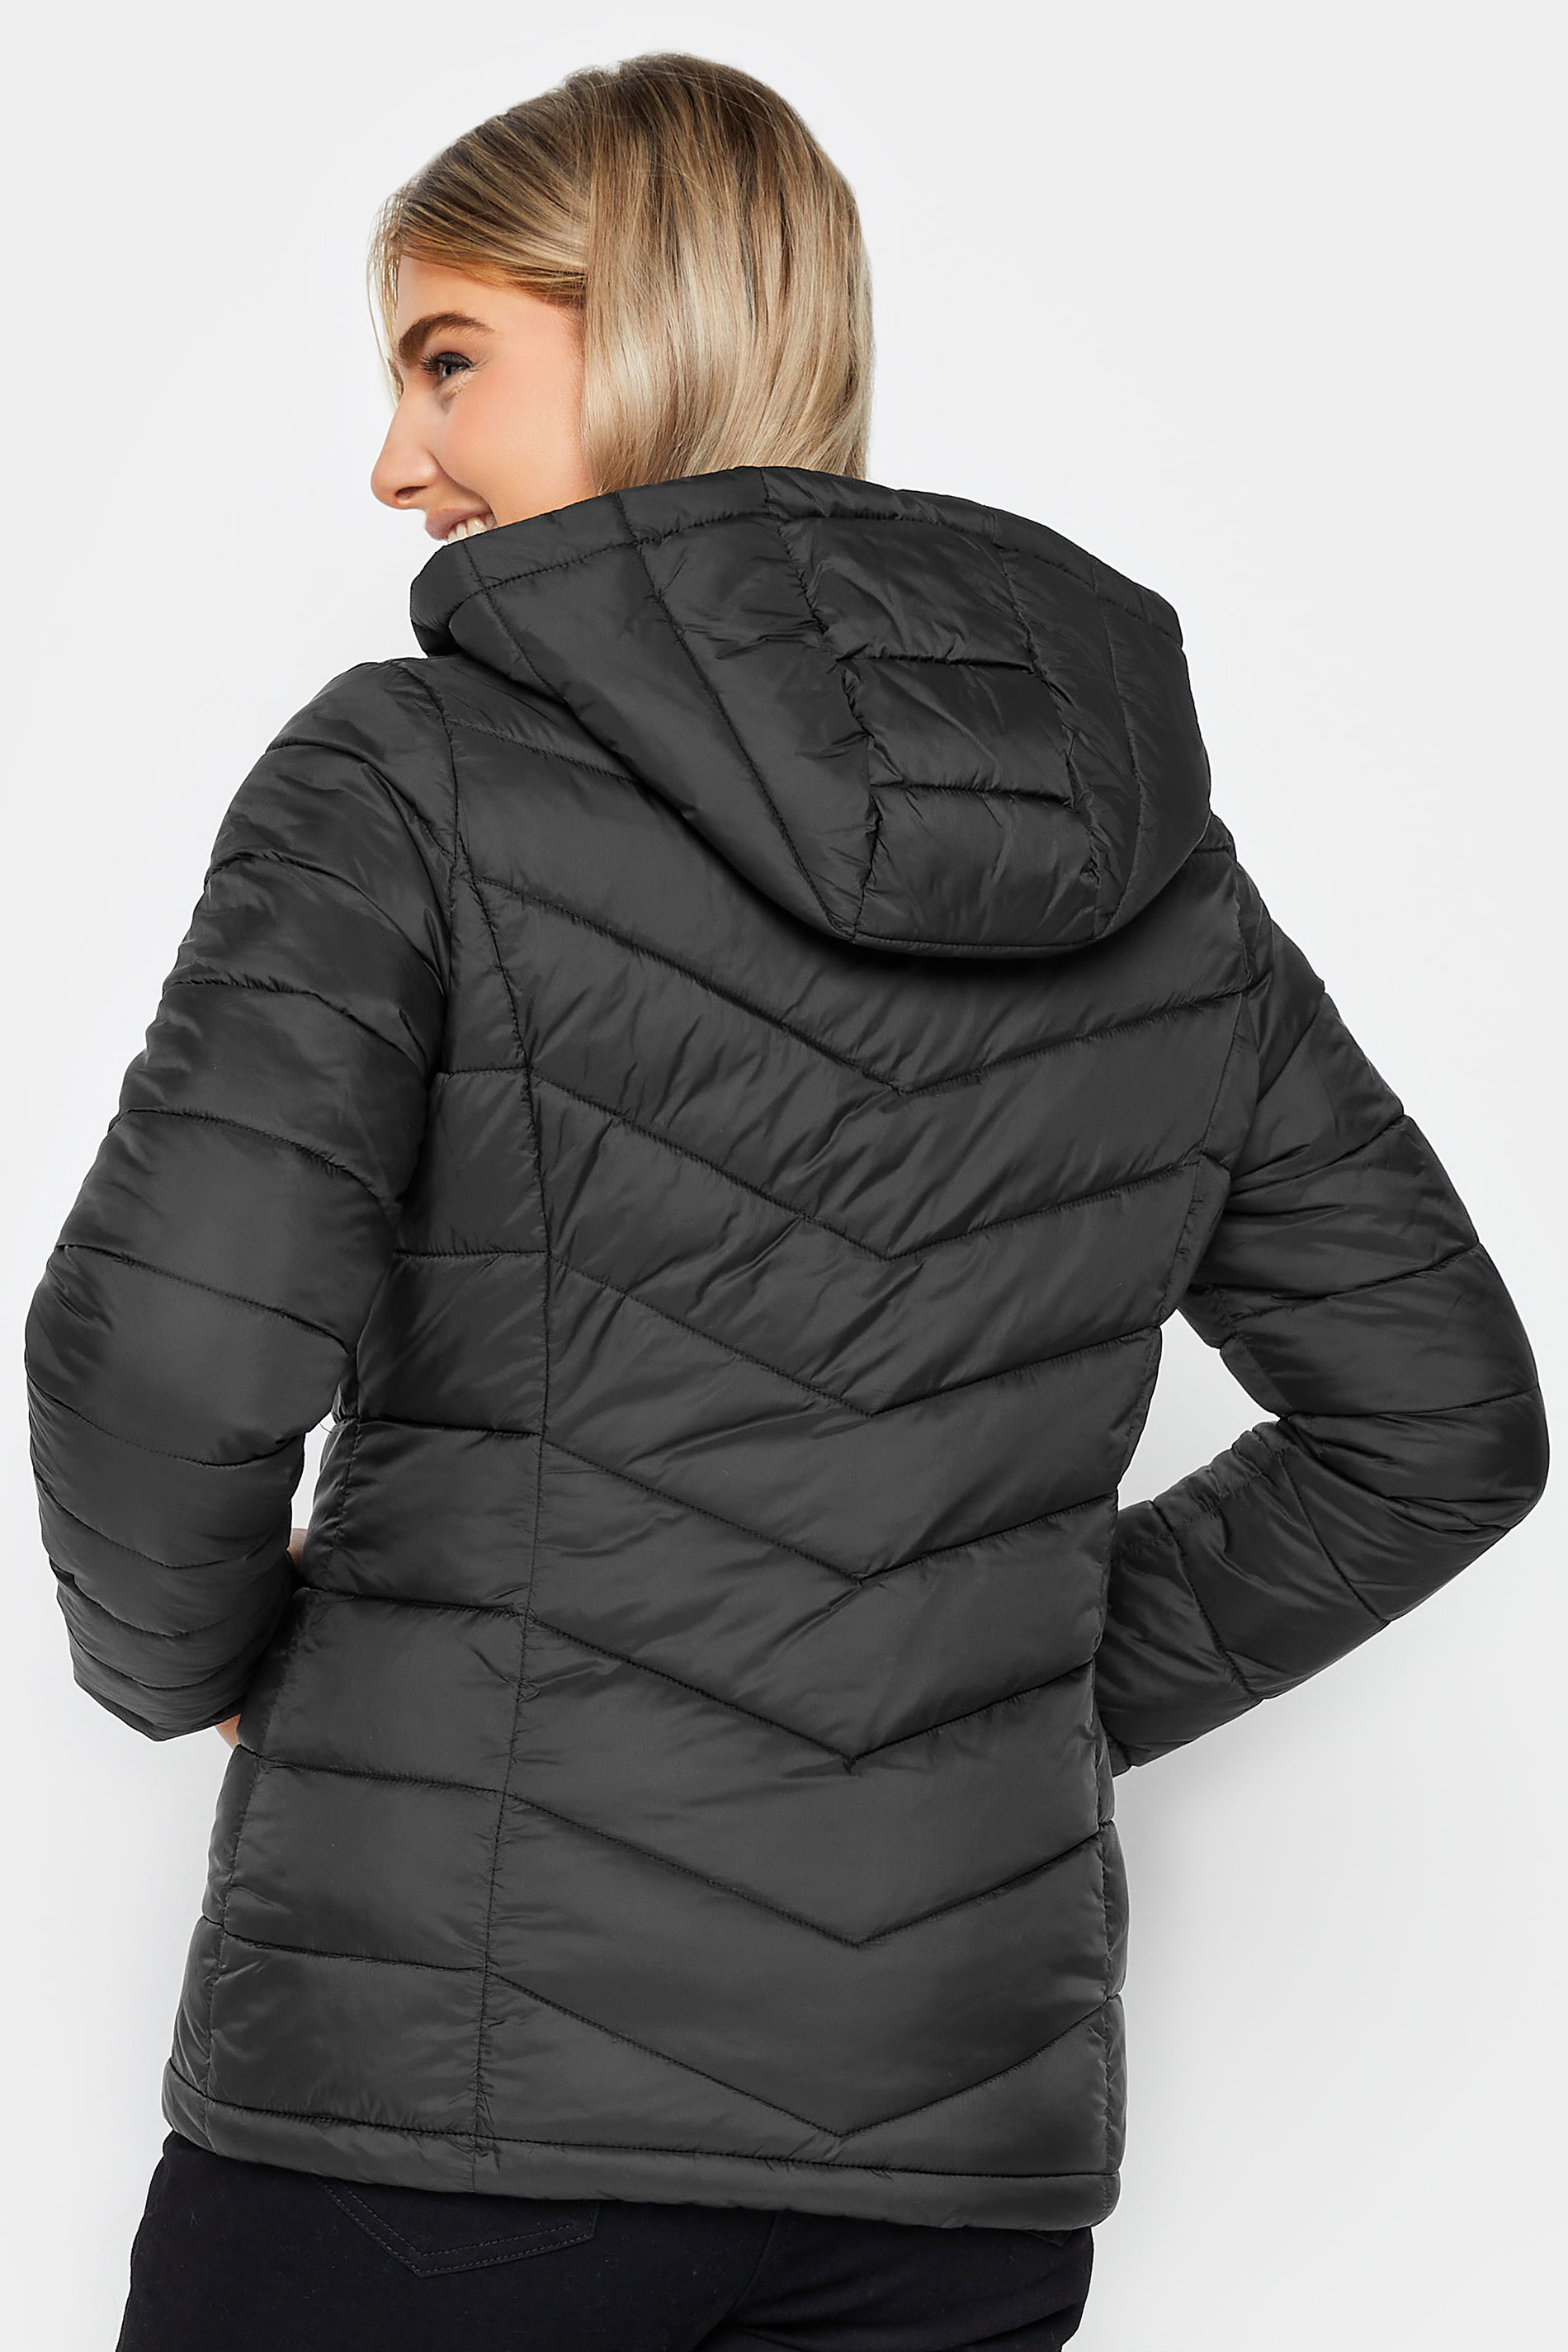 M&Co Black Quilted Puffer Jacket | M&Co 3